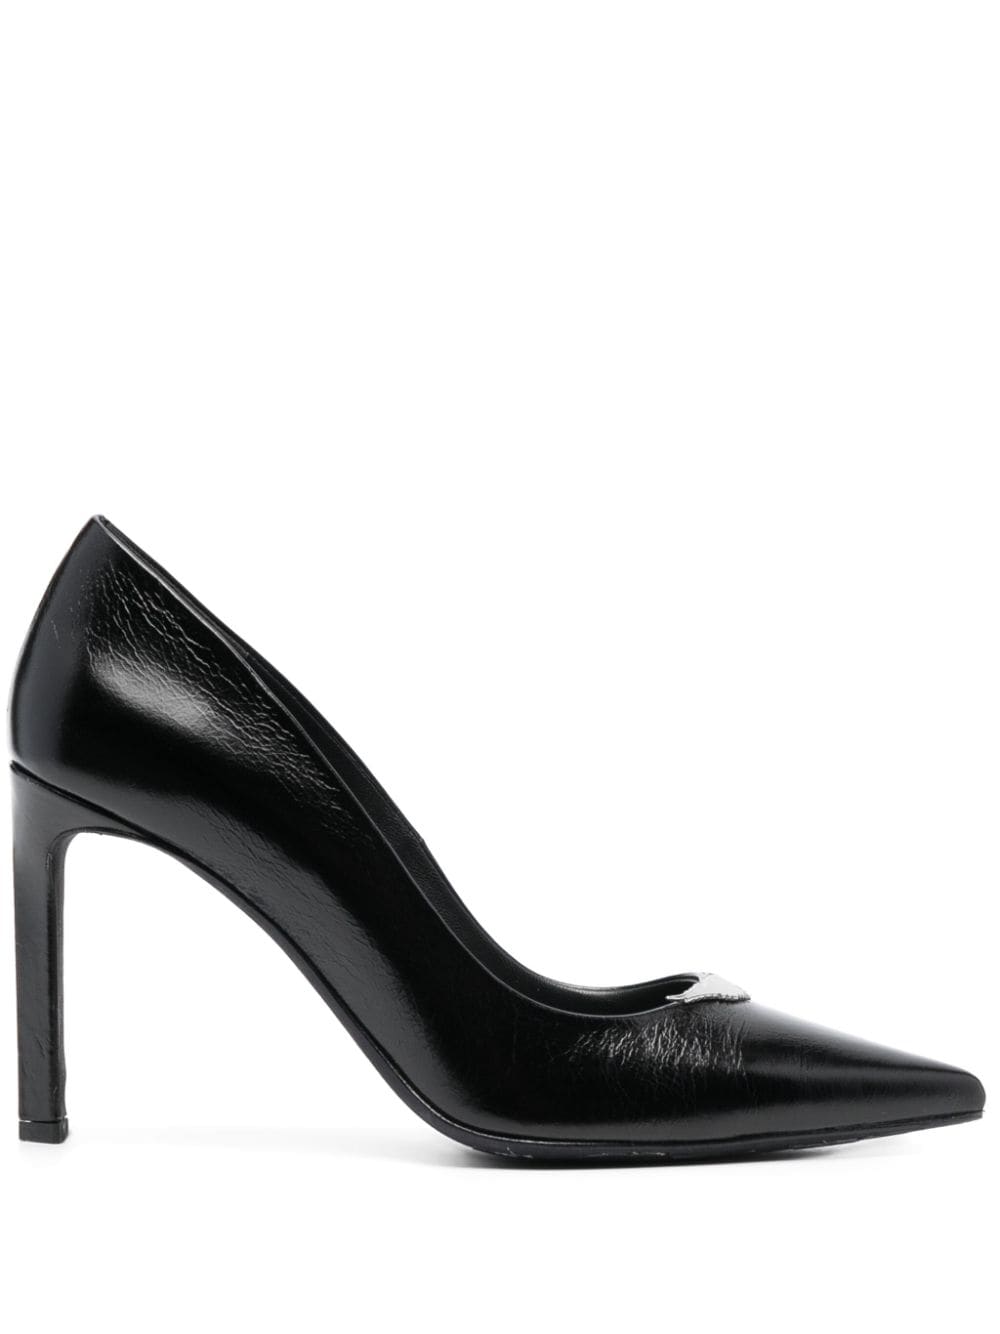 Image 1 of Zadig&Voltaire Perfect Vintage 100mm leather pumps